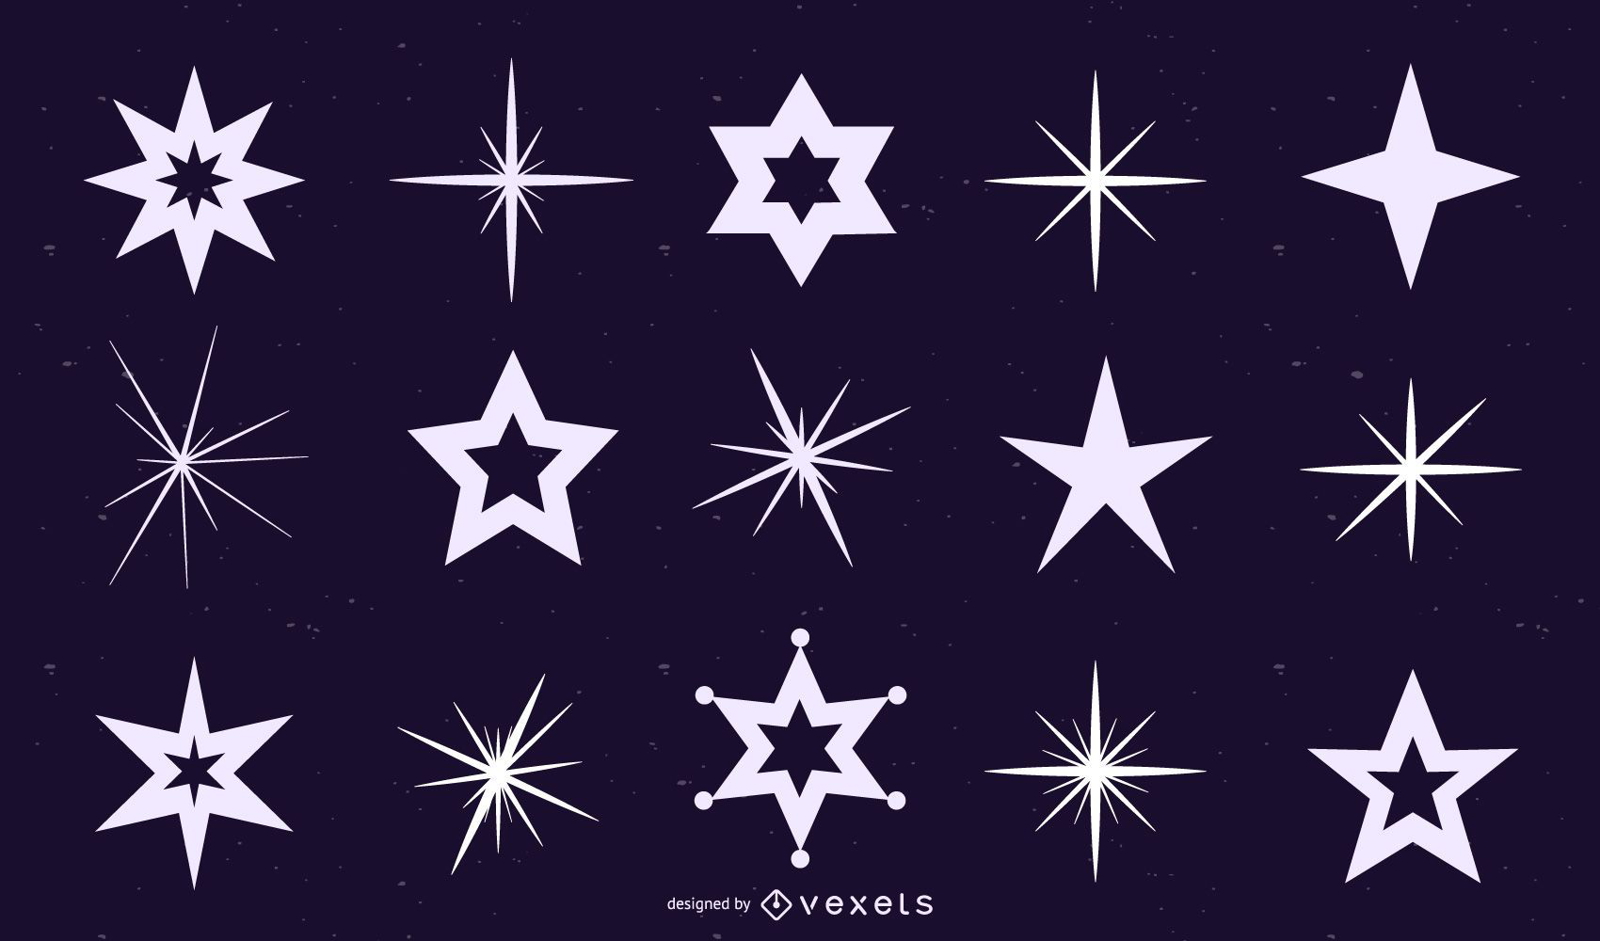 Star and sparkle silhouettes set